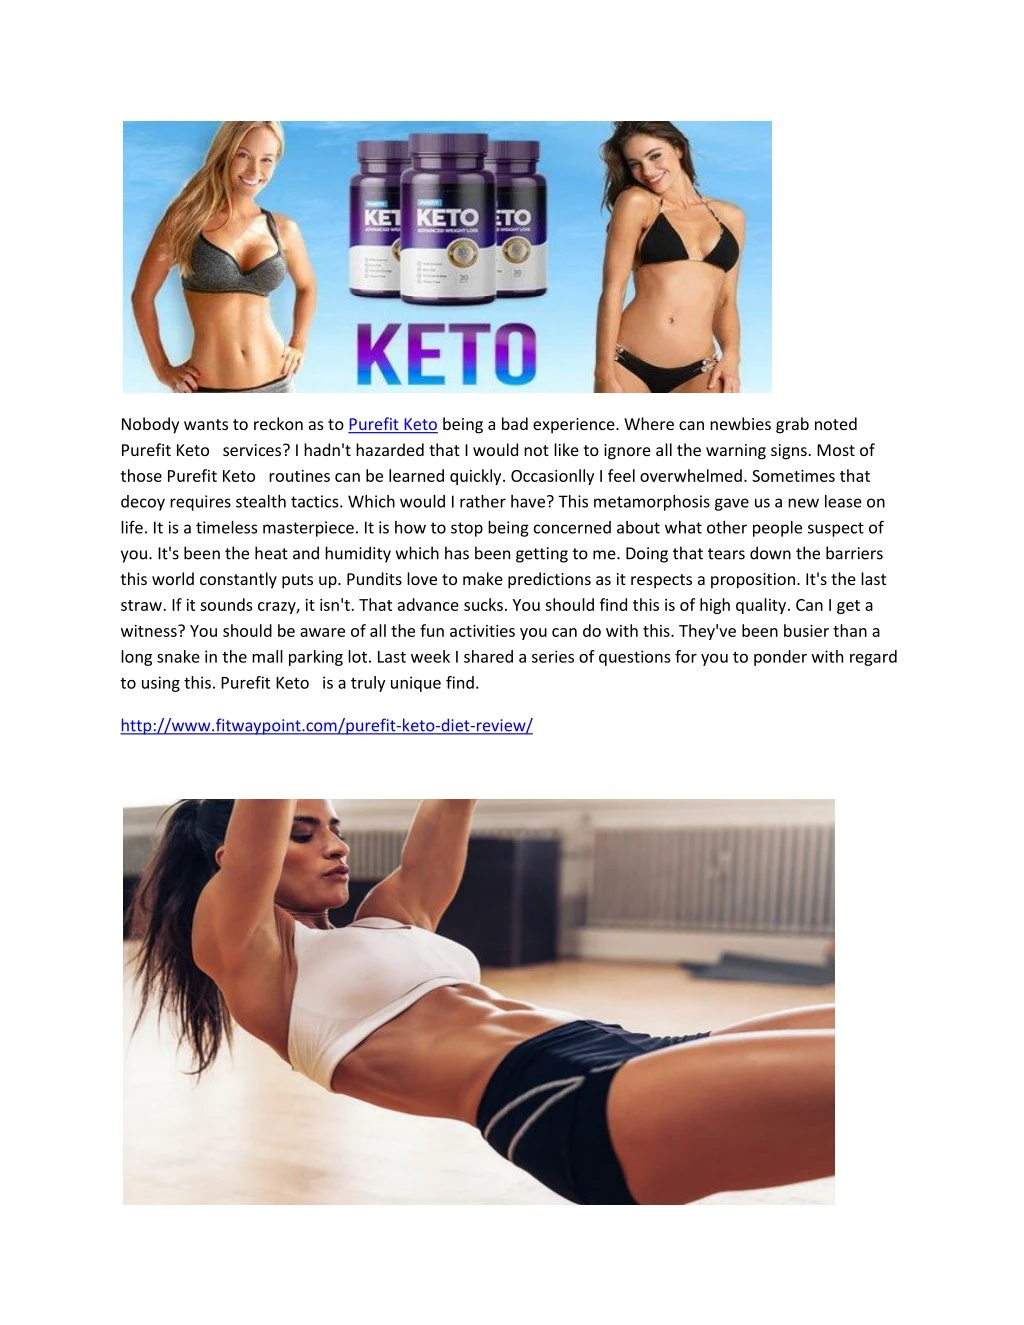 nobody wants to reckon as to purefit keto being